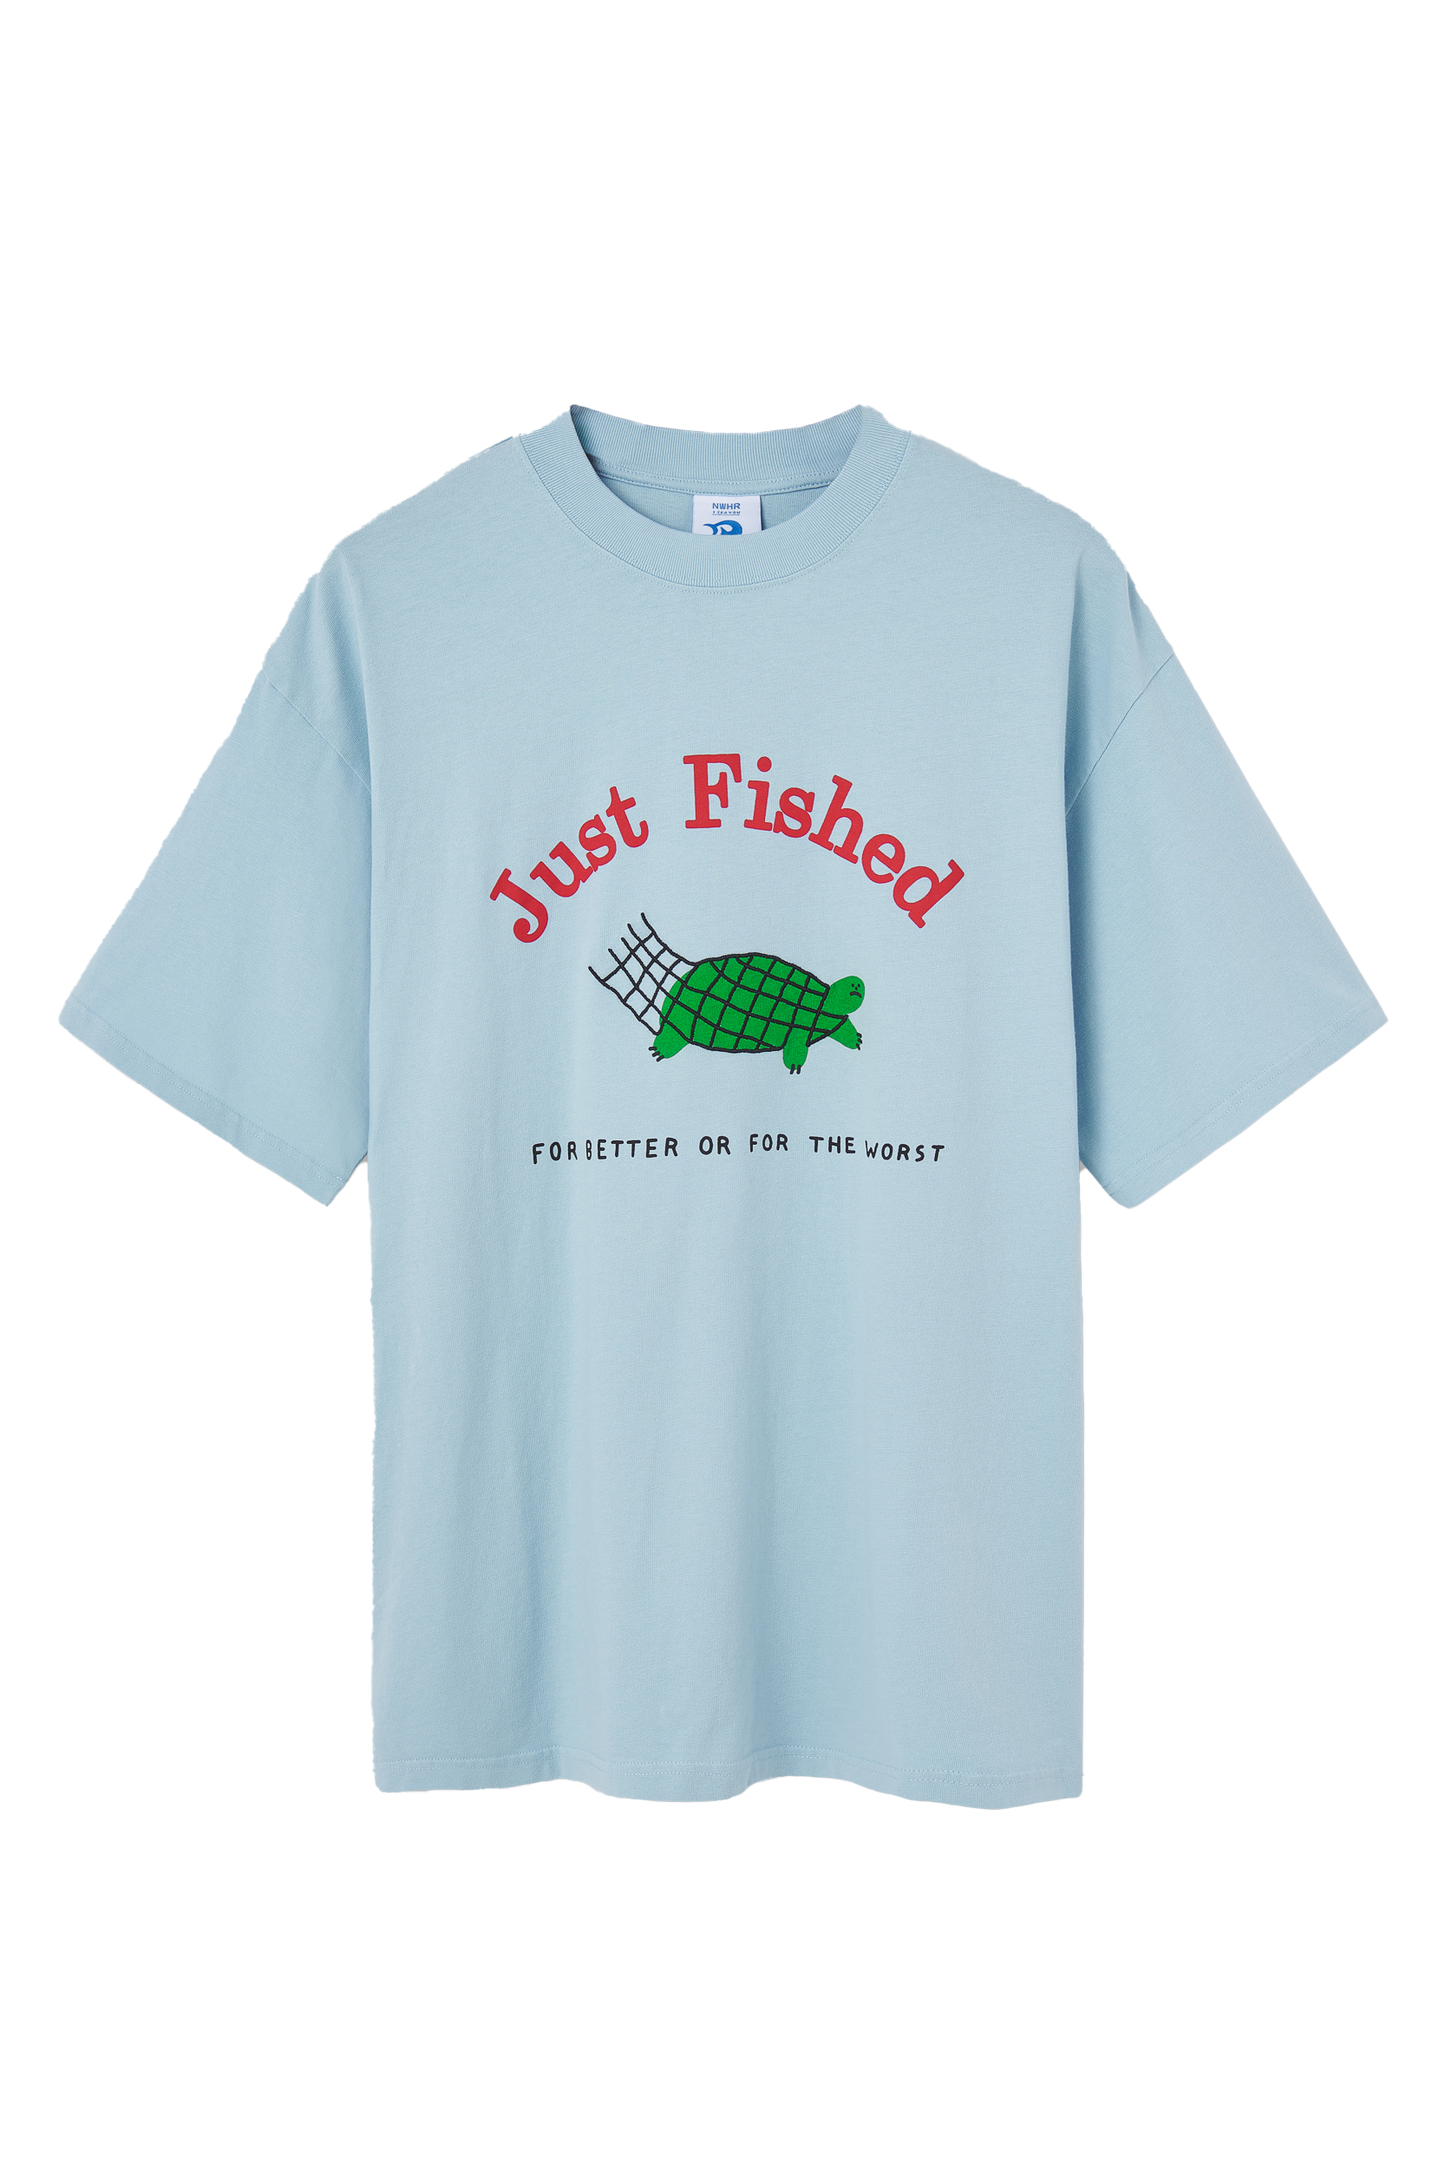 Just fished T-shirt